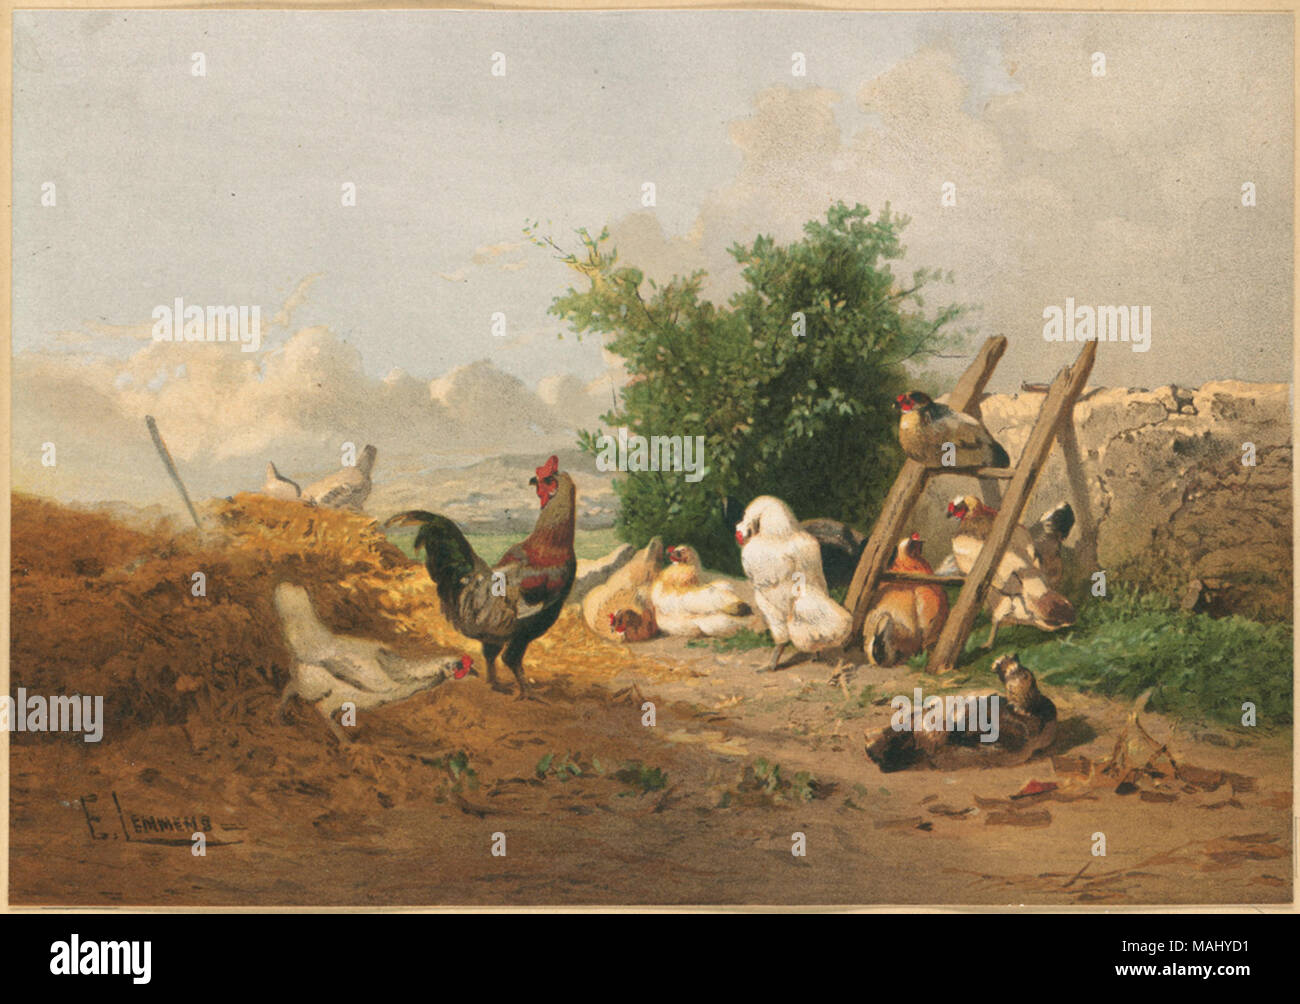 07 11 000683 Title: Poultry Life - B Creator/Contributor: Lemmens, E. (artist); L. Prang & Co. (publisher) Date issued: 1861-1897 (approximate)  Physical description note: Genre: Chromolithographs; Genre prints Location: Boston Public Library,    on 2011-08-07: Camera: Sinar AG Sinarback 54 FW, Sinar m Stock Photo